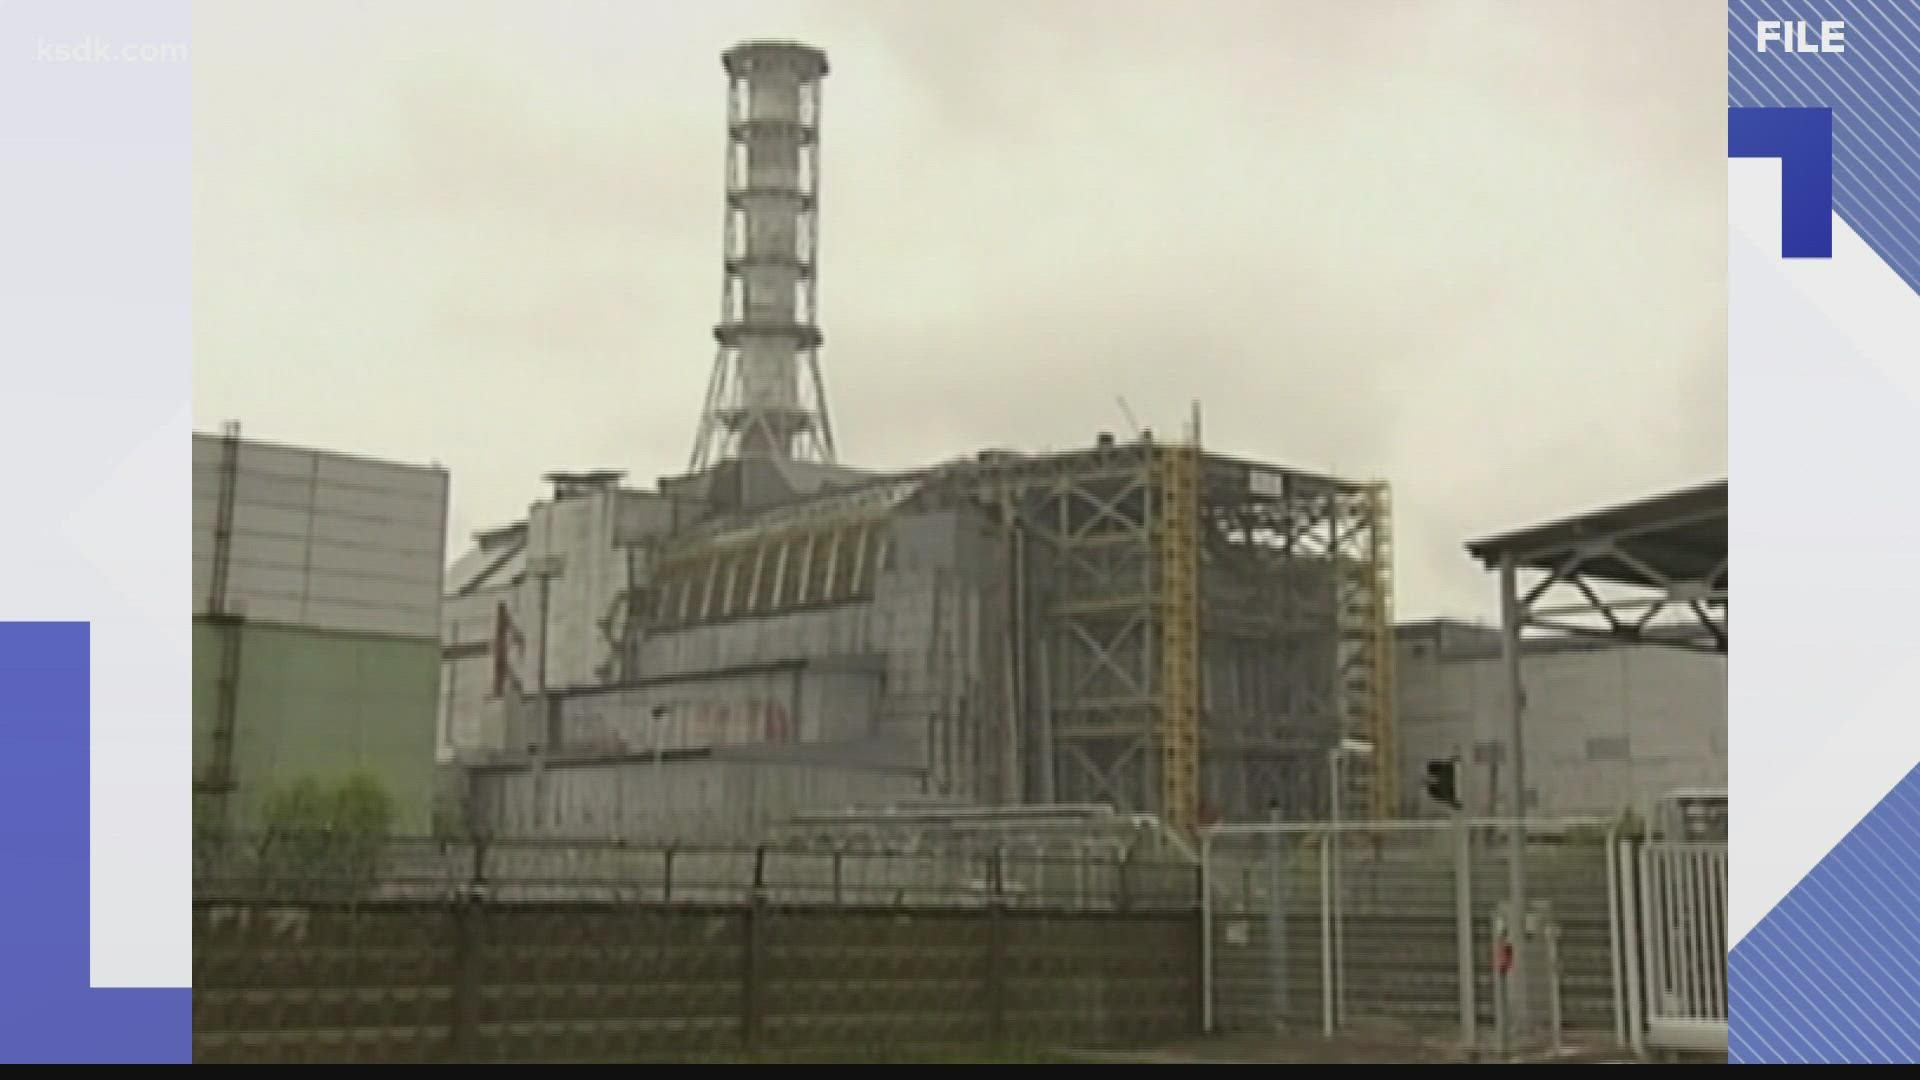 Clean Futures Fund helps those affected by what's considered the worst nuclear disaster in history. Ukrainian workers have been held hostage at the power plant.